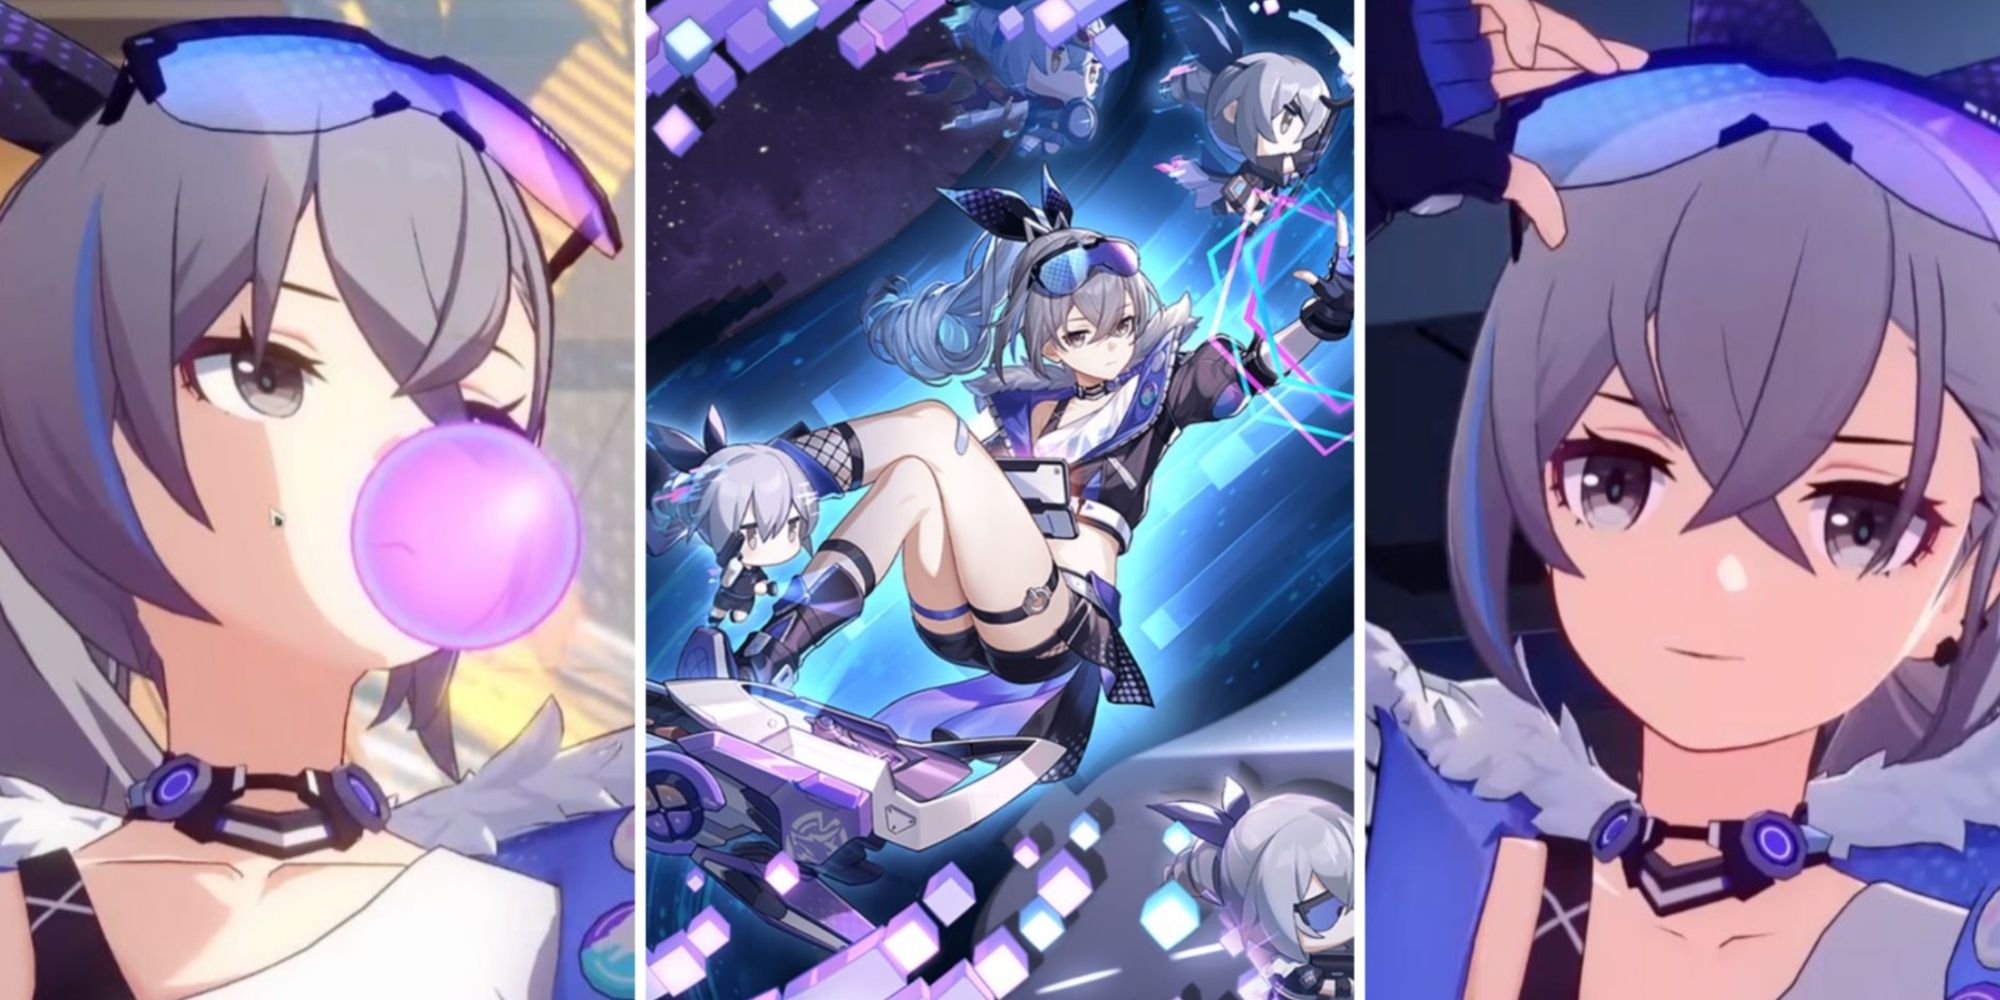 silver wolf featured image with bubble gum splash art and looking forward honkai star rail